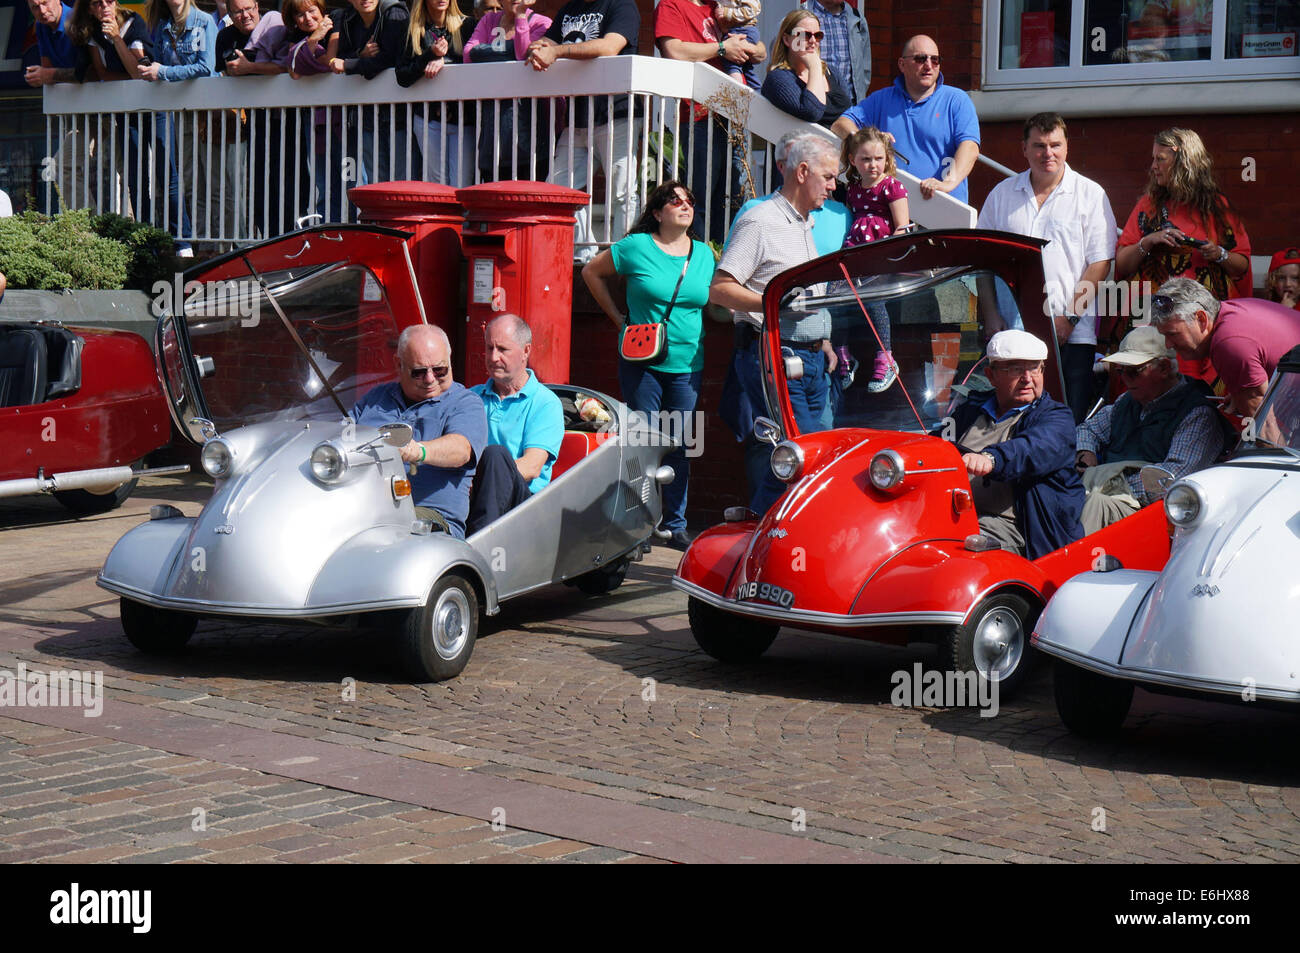 Ormskirk, Lancashire, UK. 24th August, 2014. A vast array of vintage and classic motor vehicles were on display in Ormskirk Town Centre . It was all part of the 3rd Ormskirk Motor Fest on Sunday, 24 August, 2014. Credit:  Pak Hung Chan/Alamy Live News Stock Photo